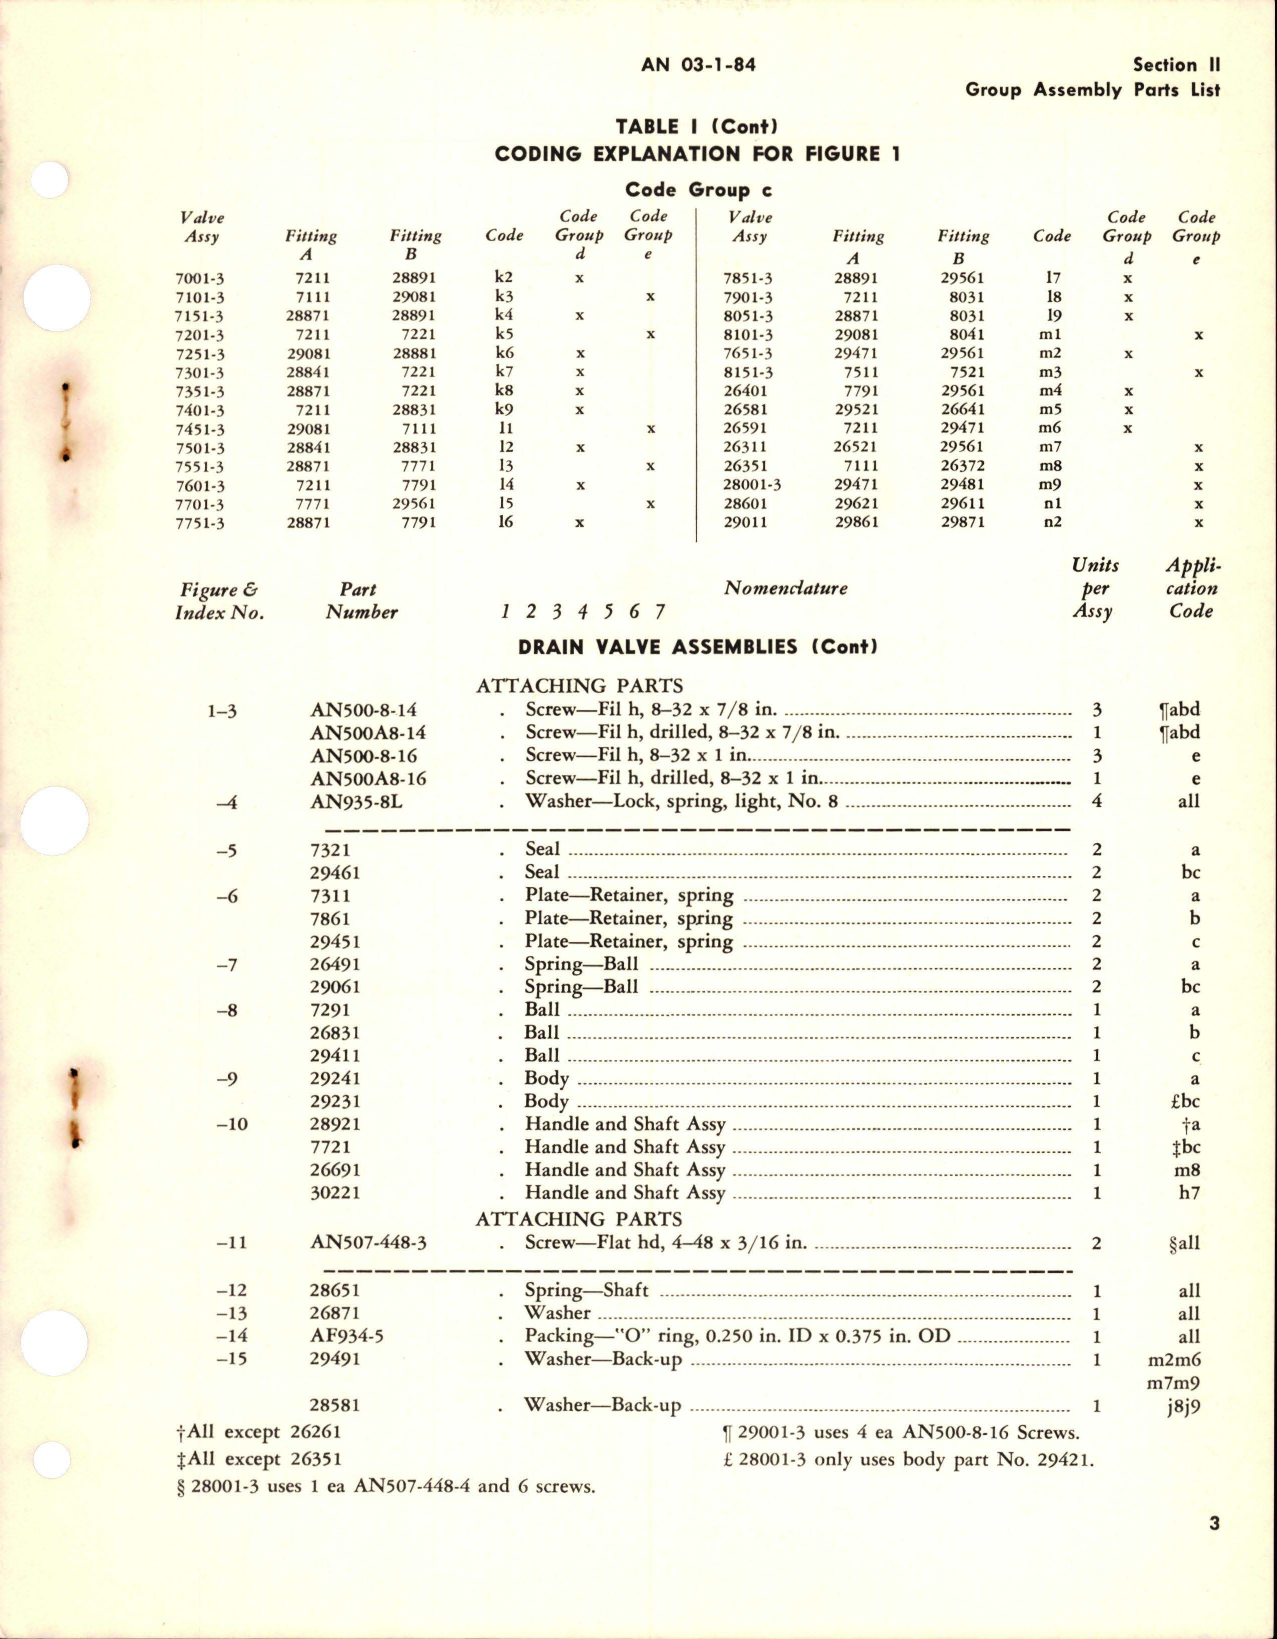 Sample page 5 from AirCorps Library document: Parts Catalog for Ball Type Drain Valves